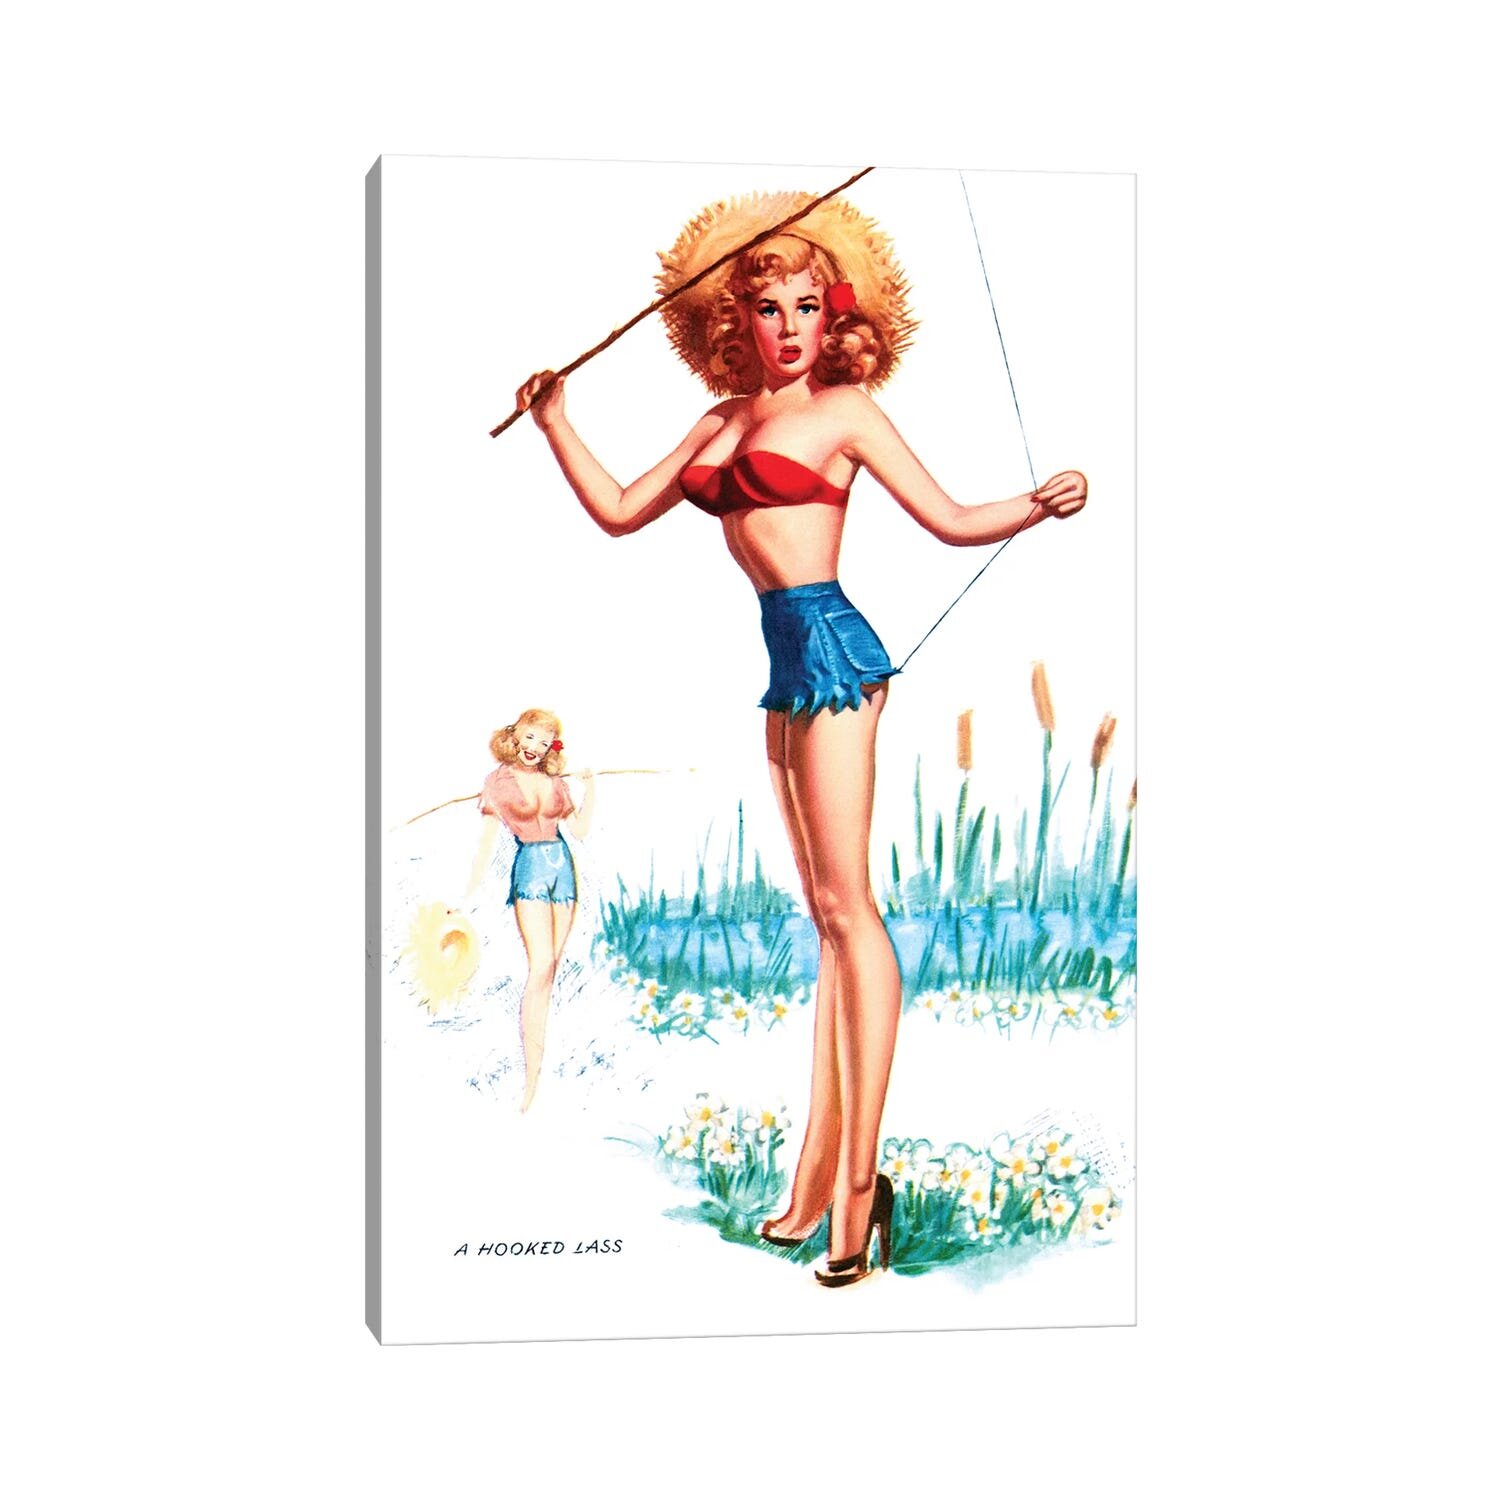 Gone Fishing Pin-up by T. N. Thompson by Piddix - Wrapped Canvas Graphic Art East Urban Home Size: 18 H x 12 W x 1.5 D